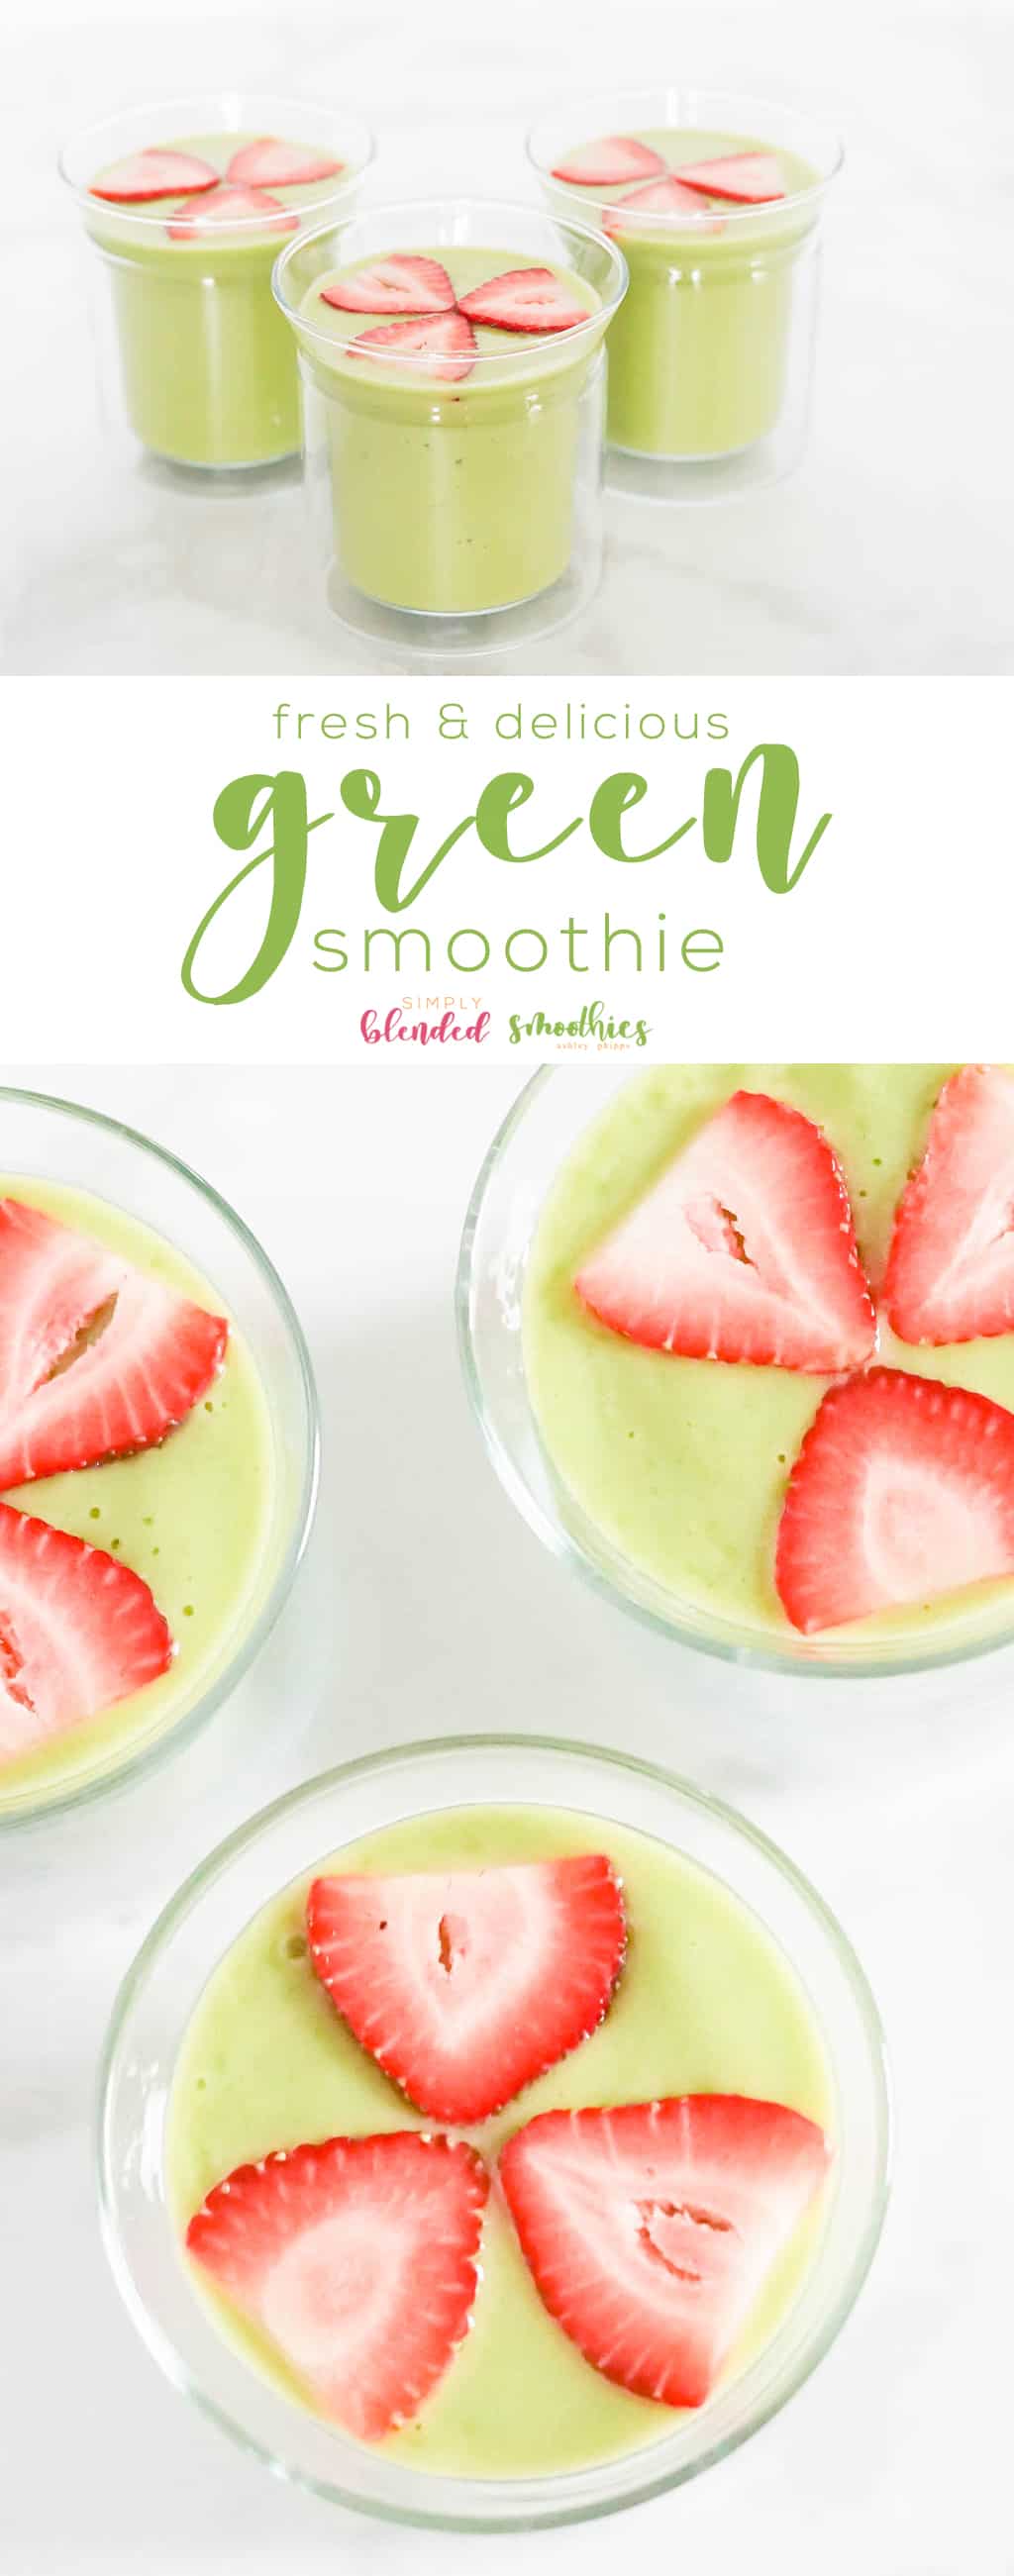 Simple And Delicious Green Smoothie Recipe - This Easy Green Smoothie Recipe Tastes Fresh And Light And Is Perfect For The Whole Family